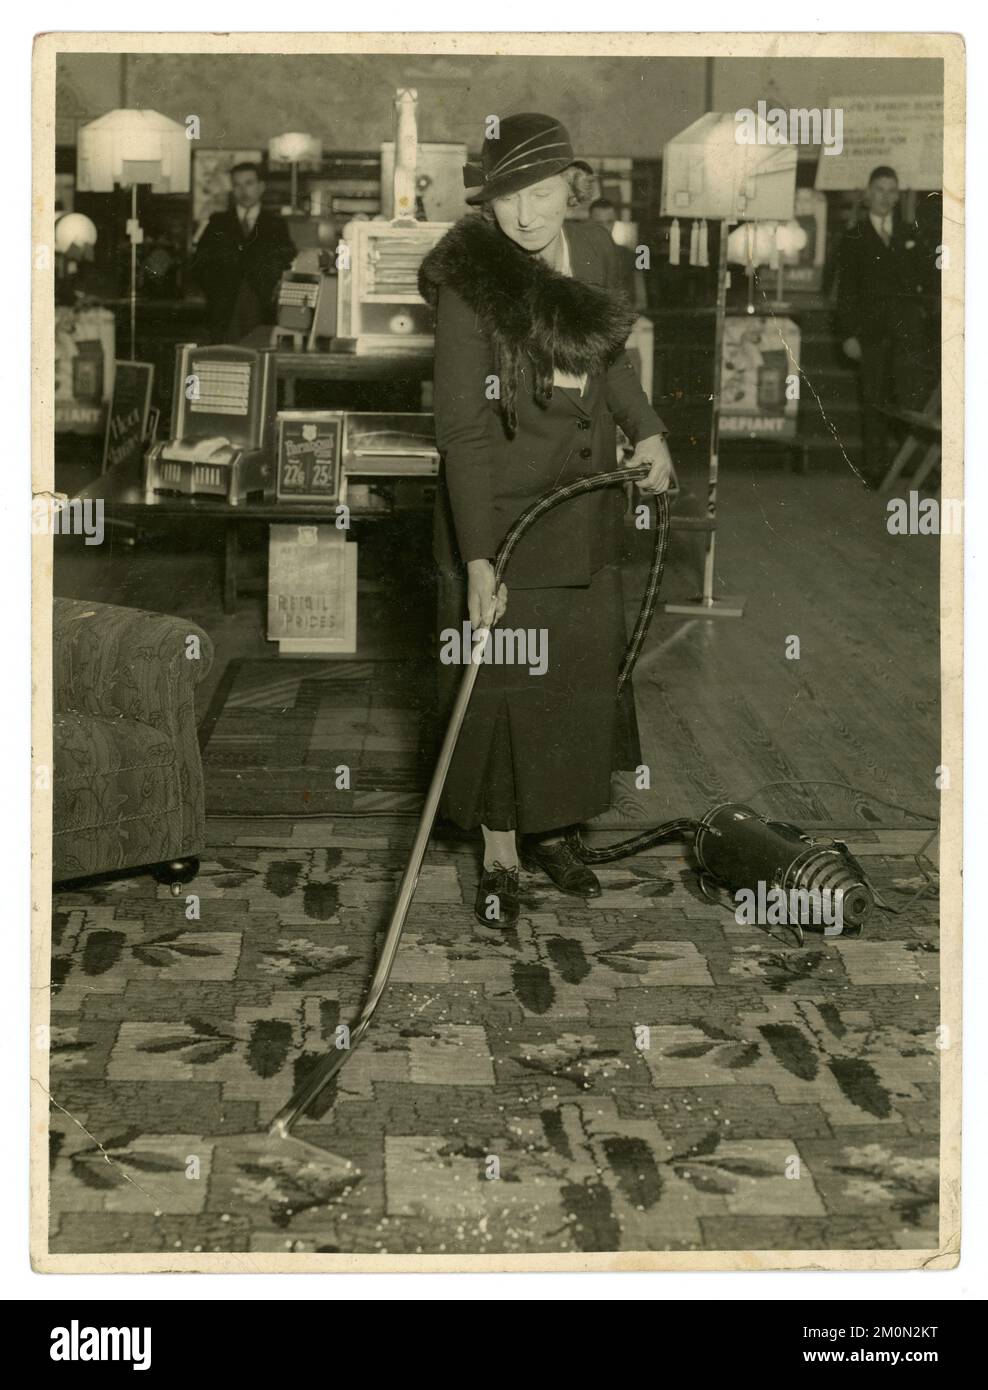 Original 1930's era press release from an electrical household goods showroom, maybe in-store demonstration in a department store, by smartly dressed woman demonstrator -  staff or customer, demonstrating using a vacuum cleaner in U.K. furniture shop showroom, early labour saving housework device, UK circa.1933. Stock Photo